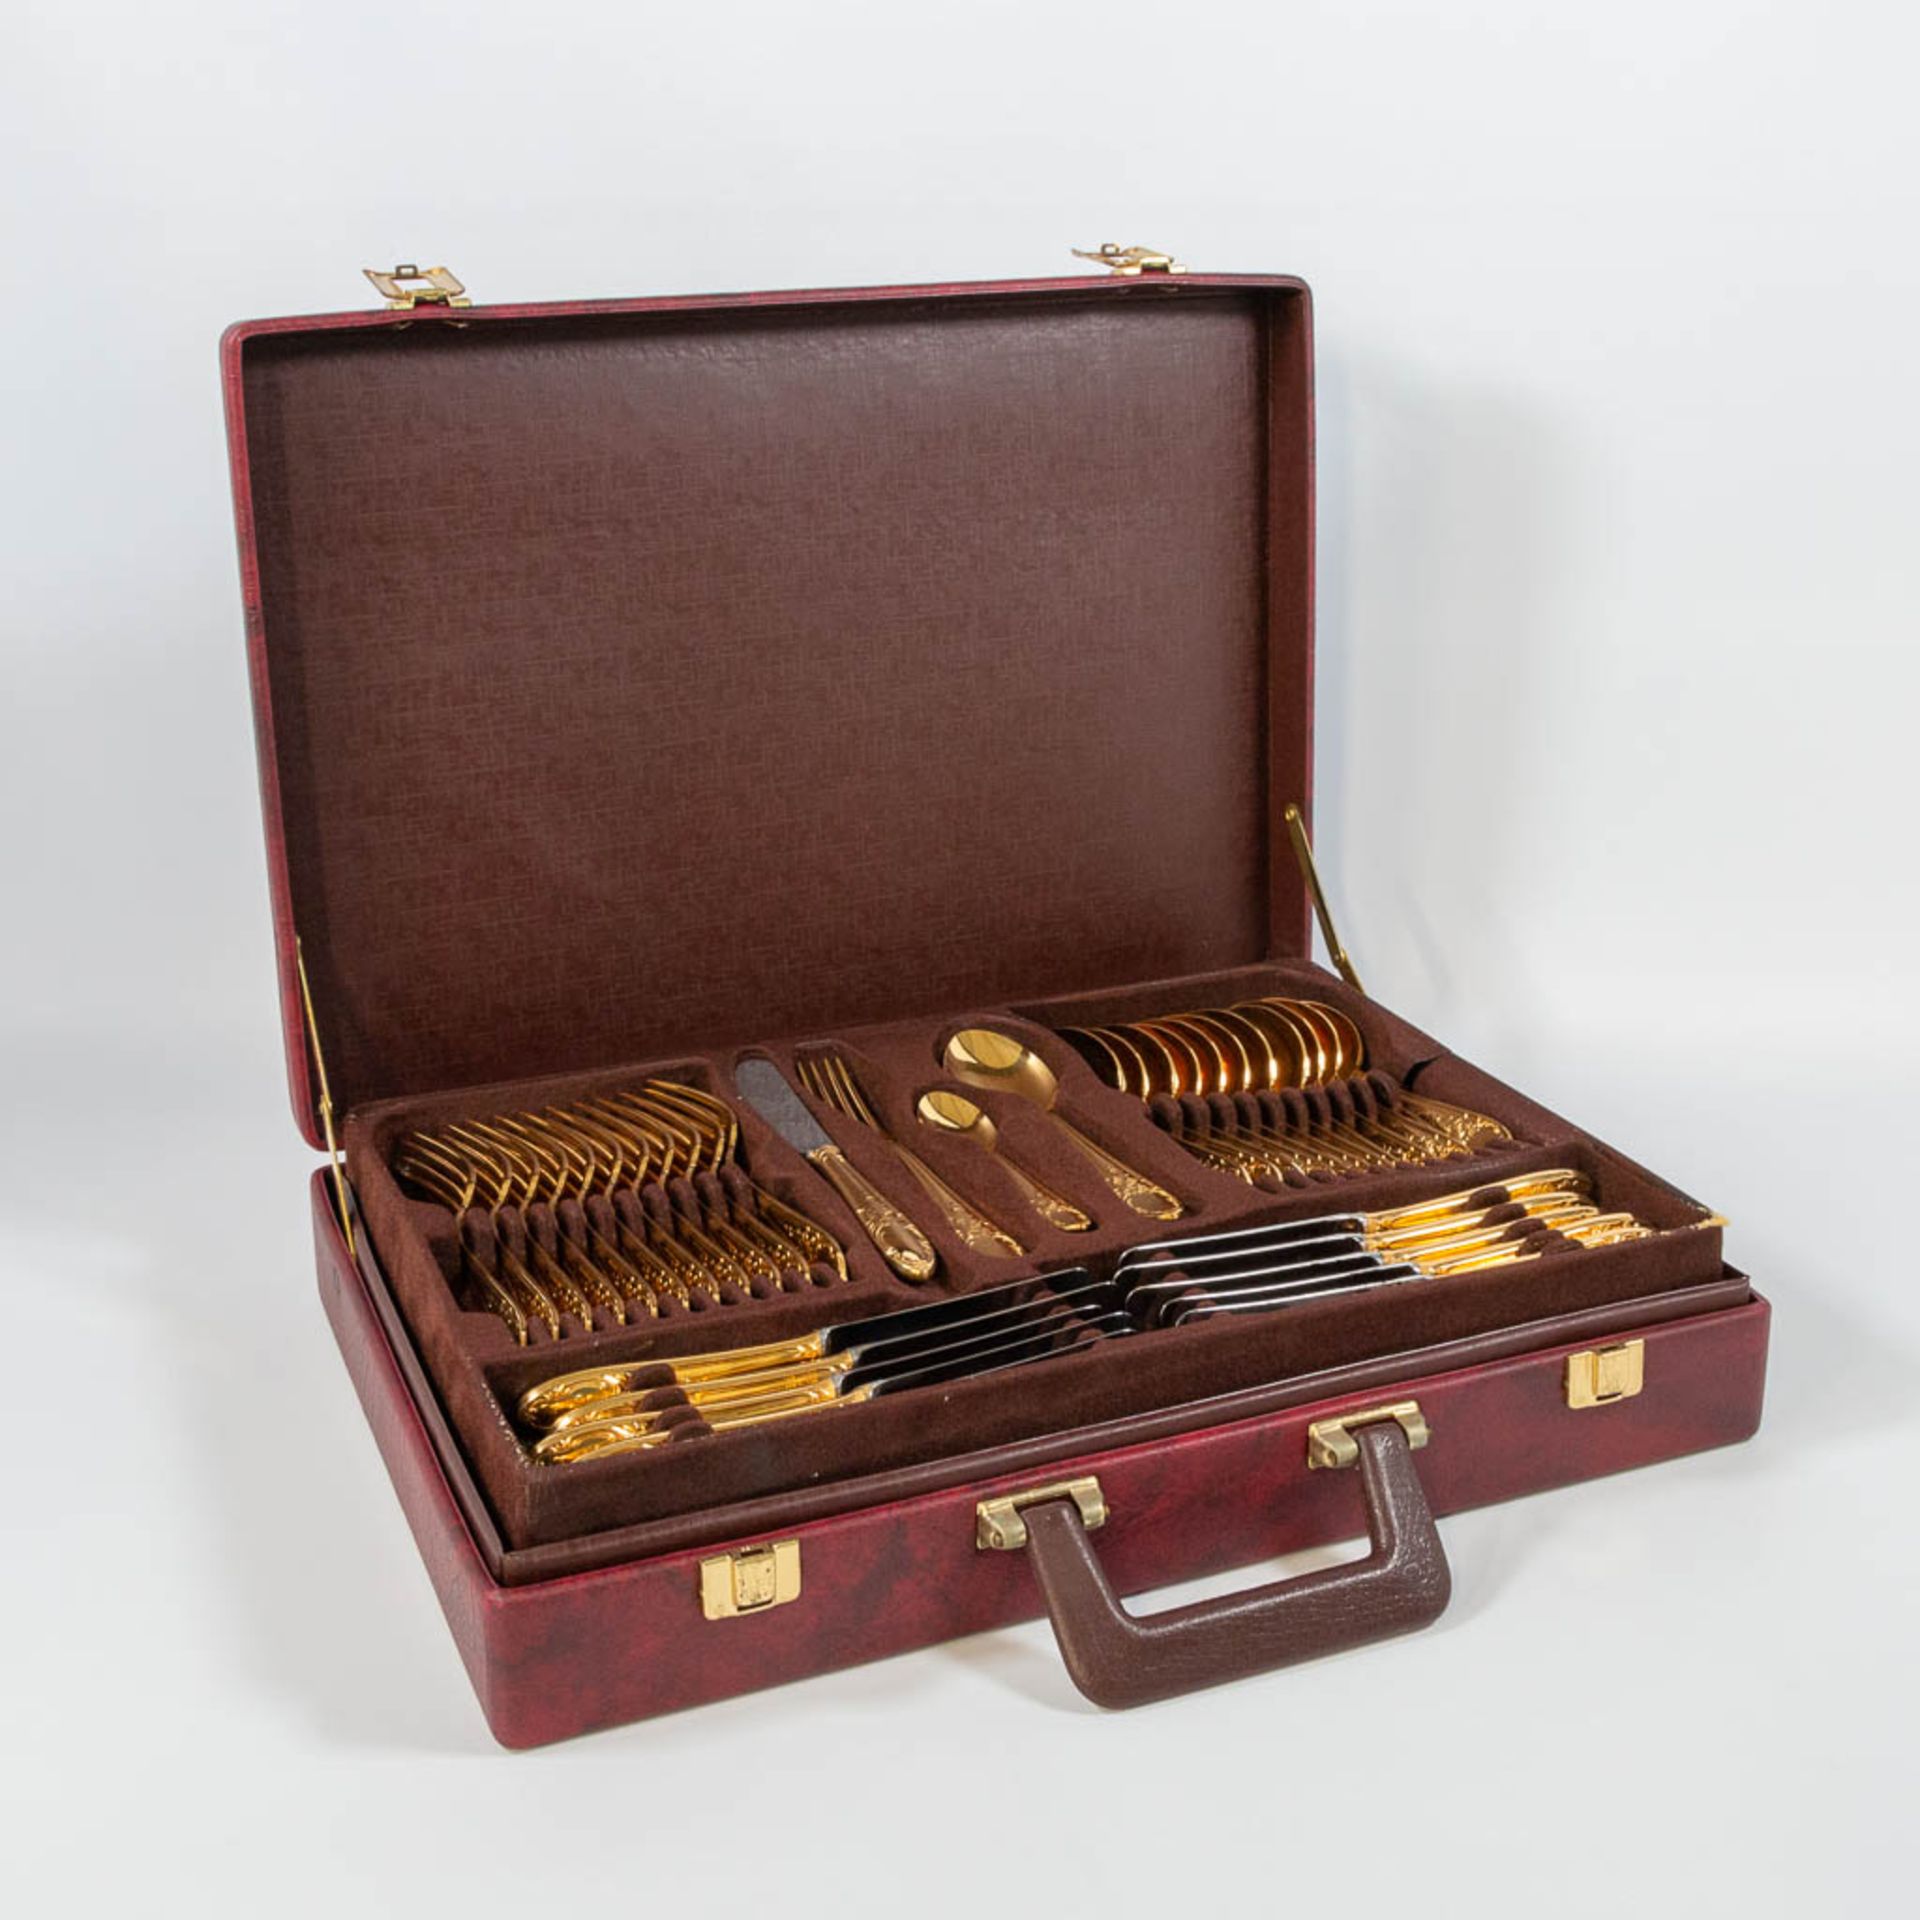 A gold-plated cuttlery set, made by Solingen in Germany. Inox 18/10 gold-plated 23 karat. - Bild 11 aus 23